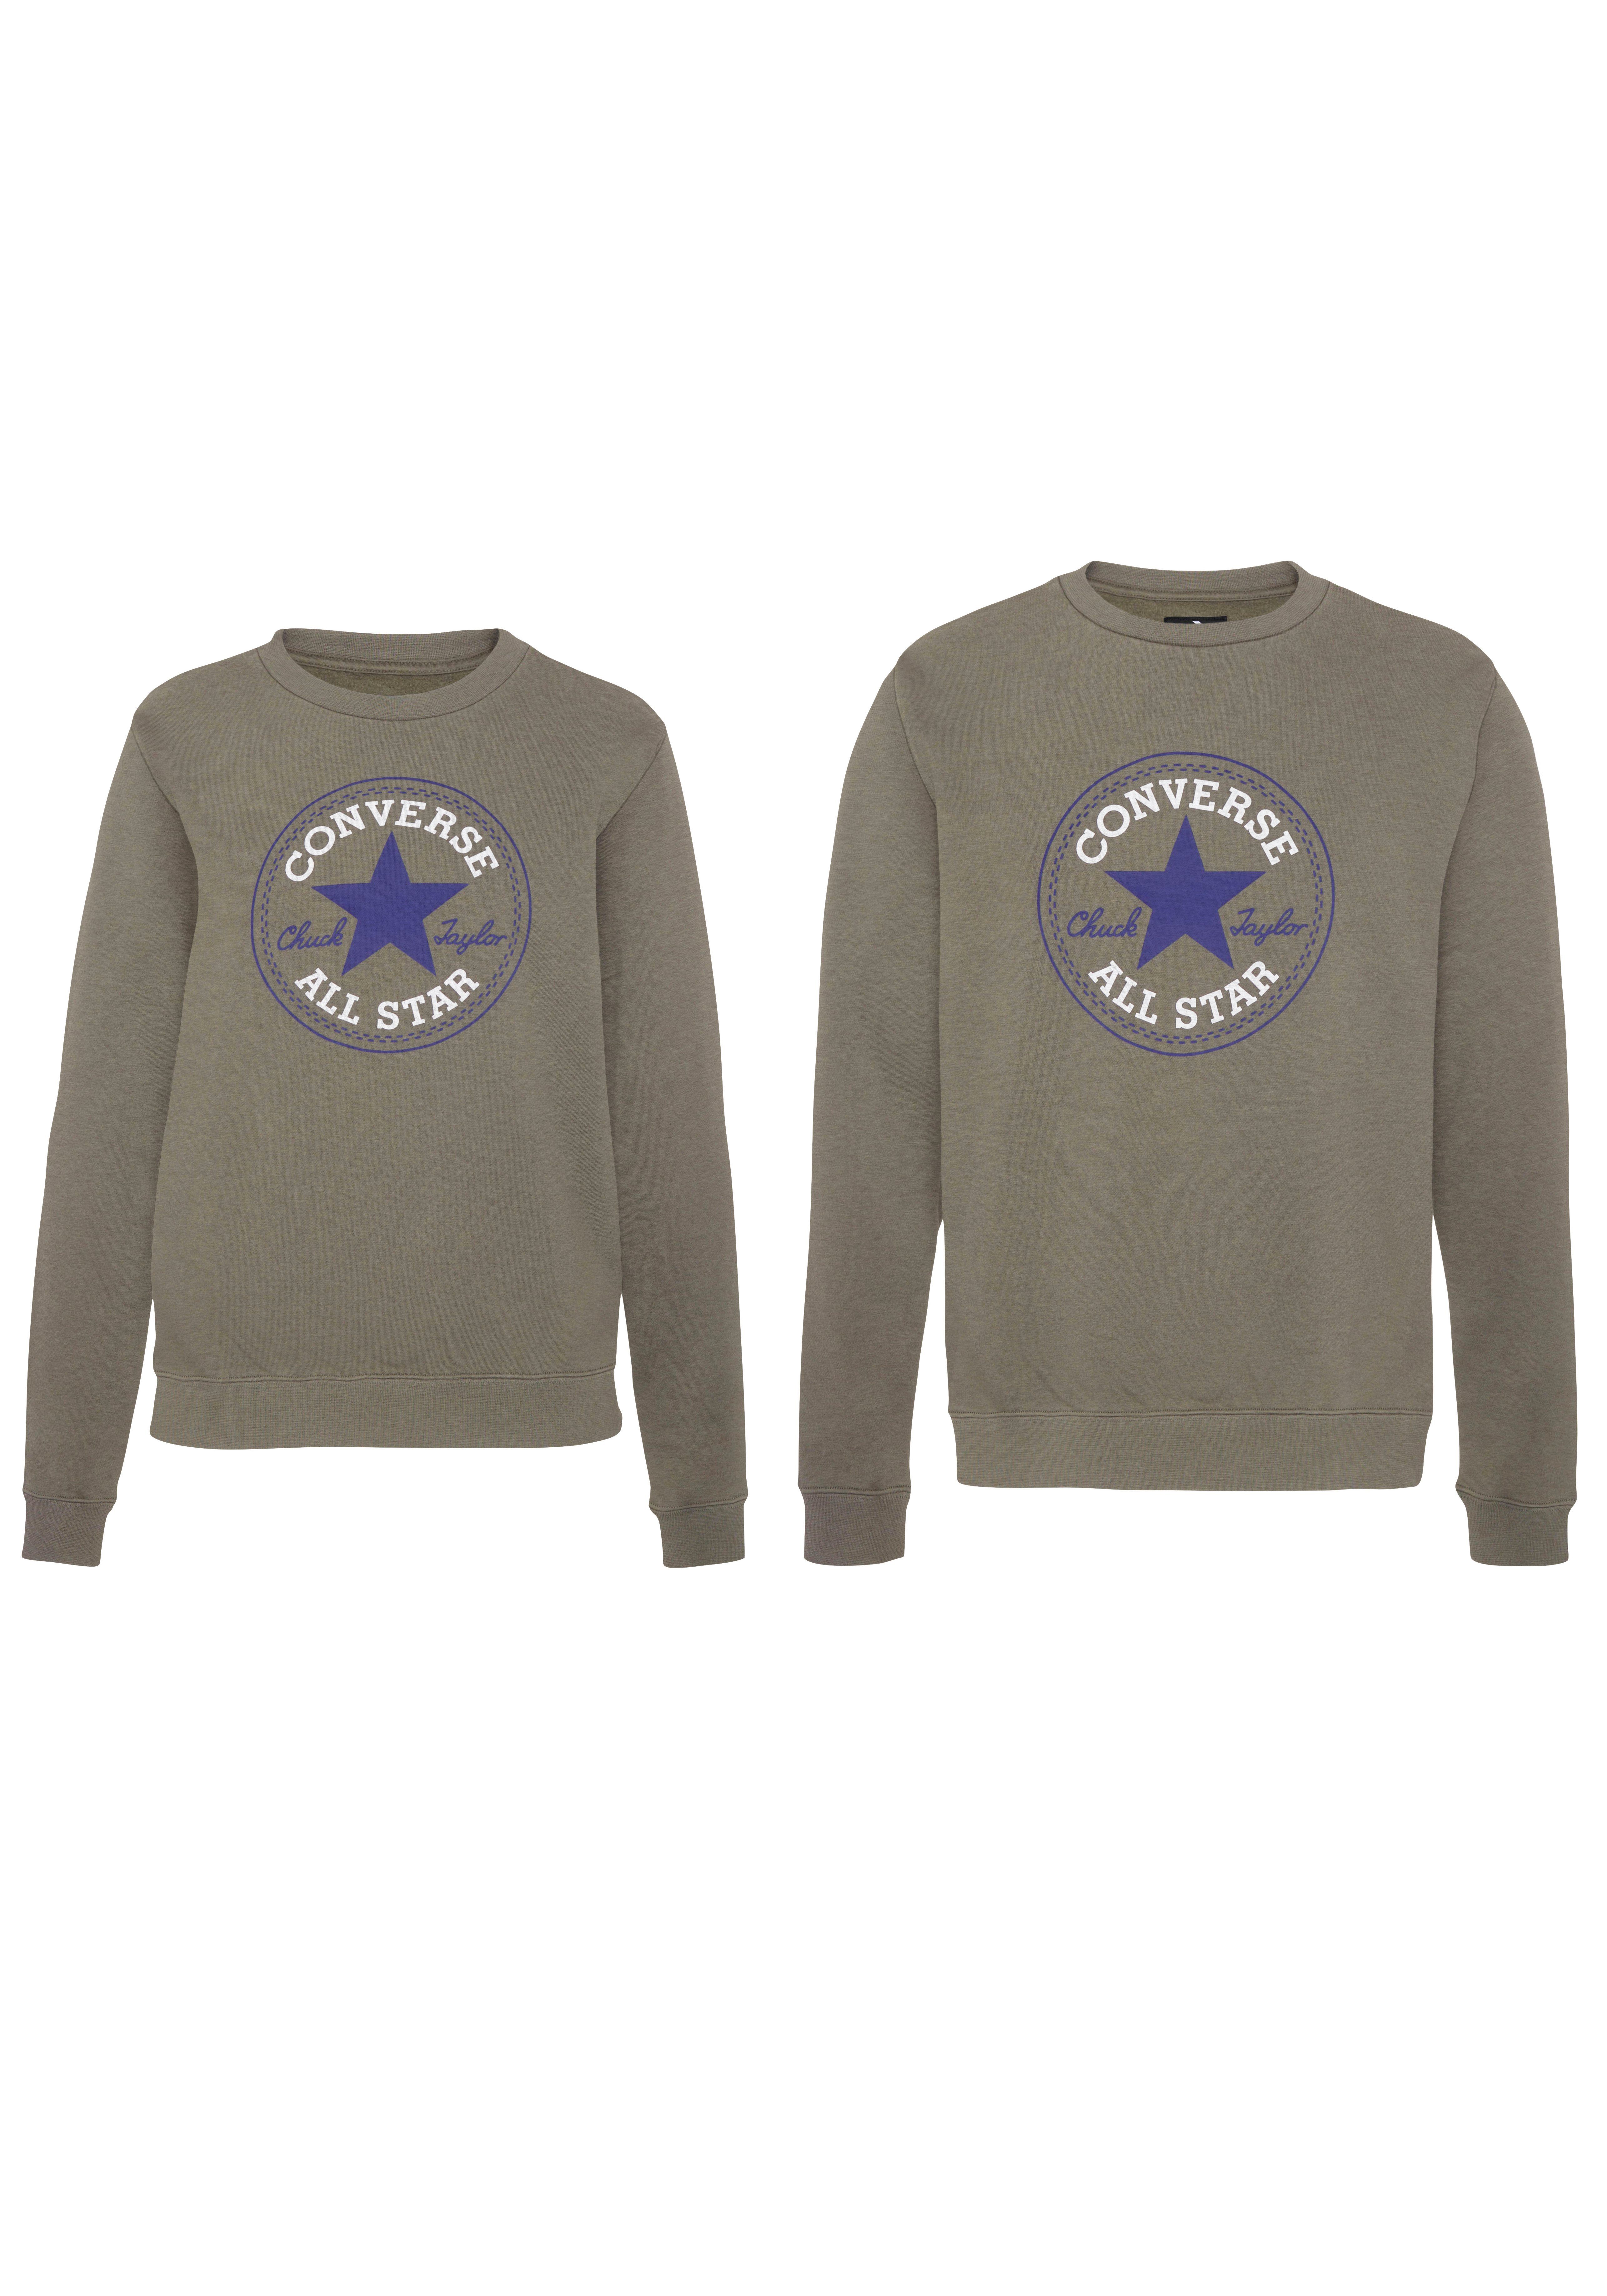 Converse Sweatshirt BACK PATCH STAR ALL BRUSHED olive UNISEX